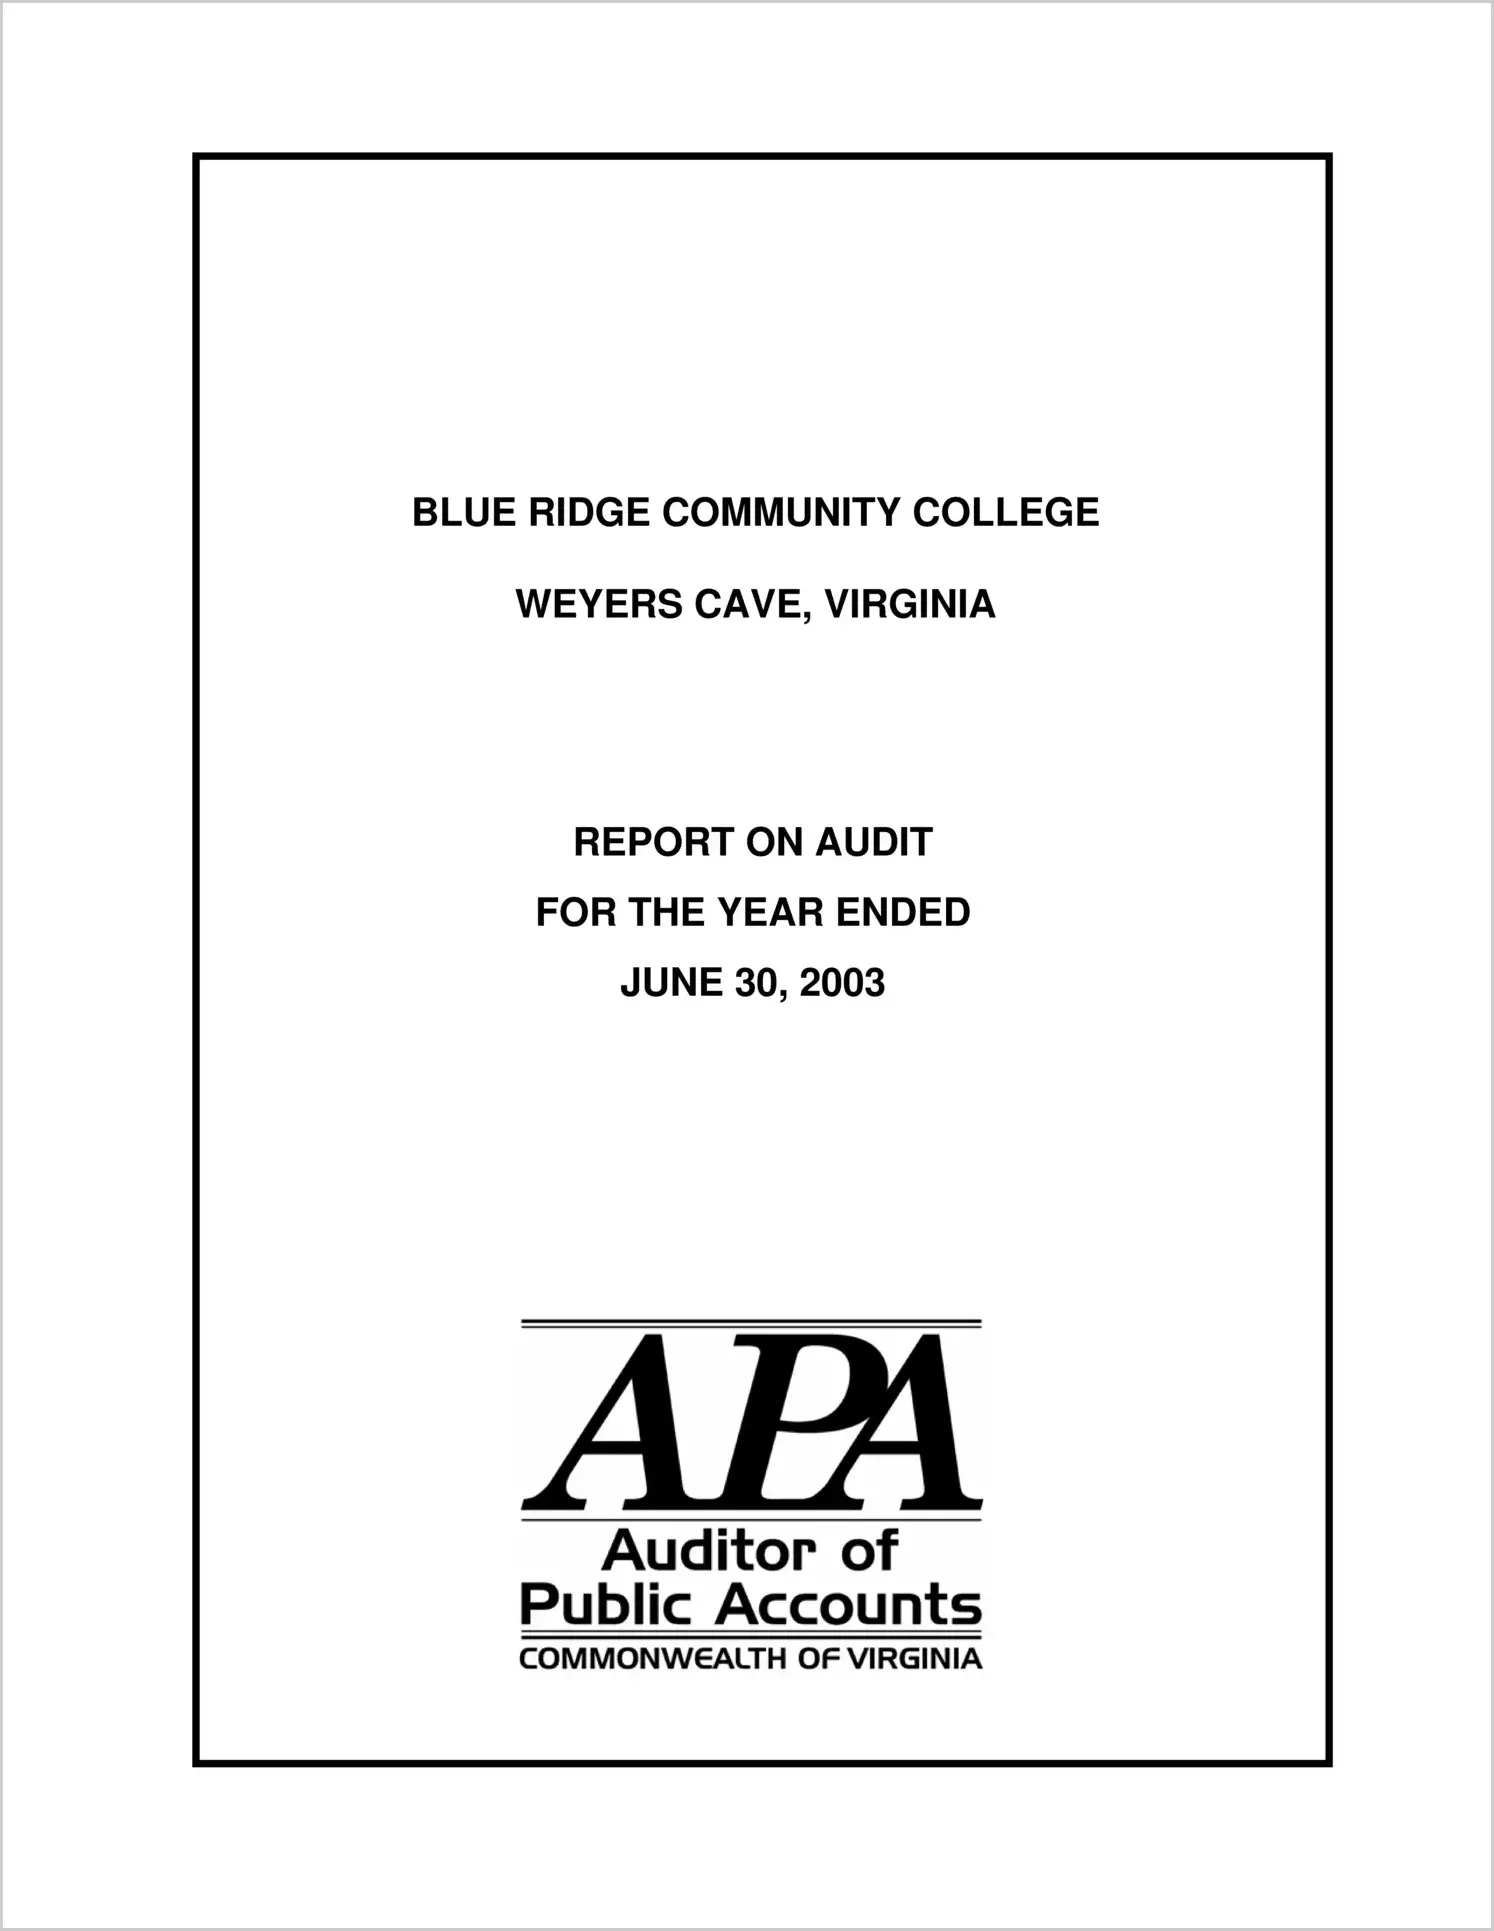 Blue Ridge Community College for the year ended June 30, 2003